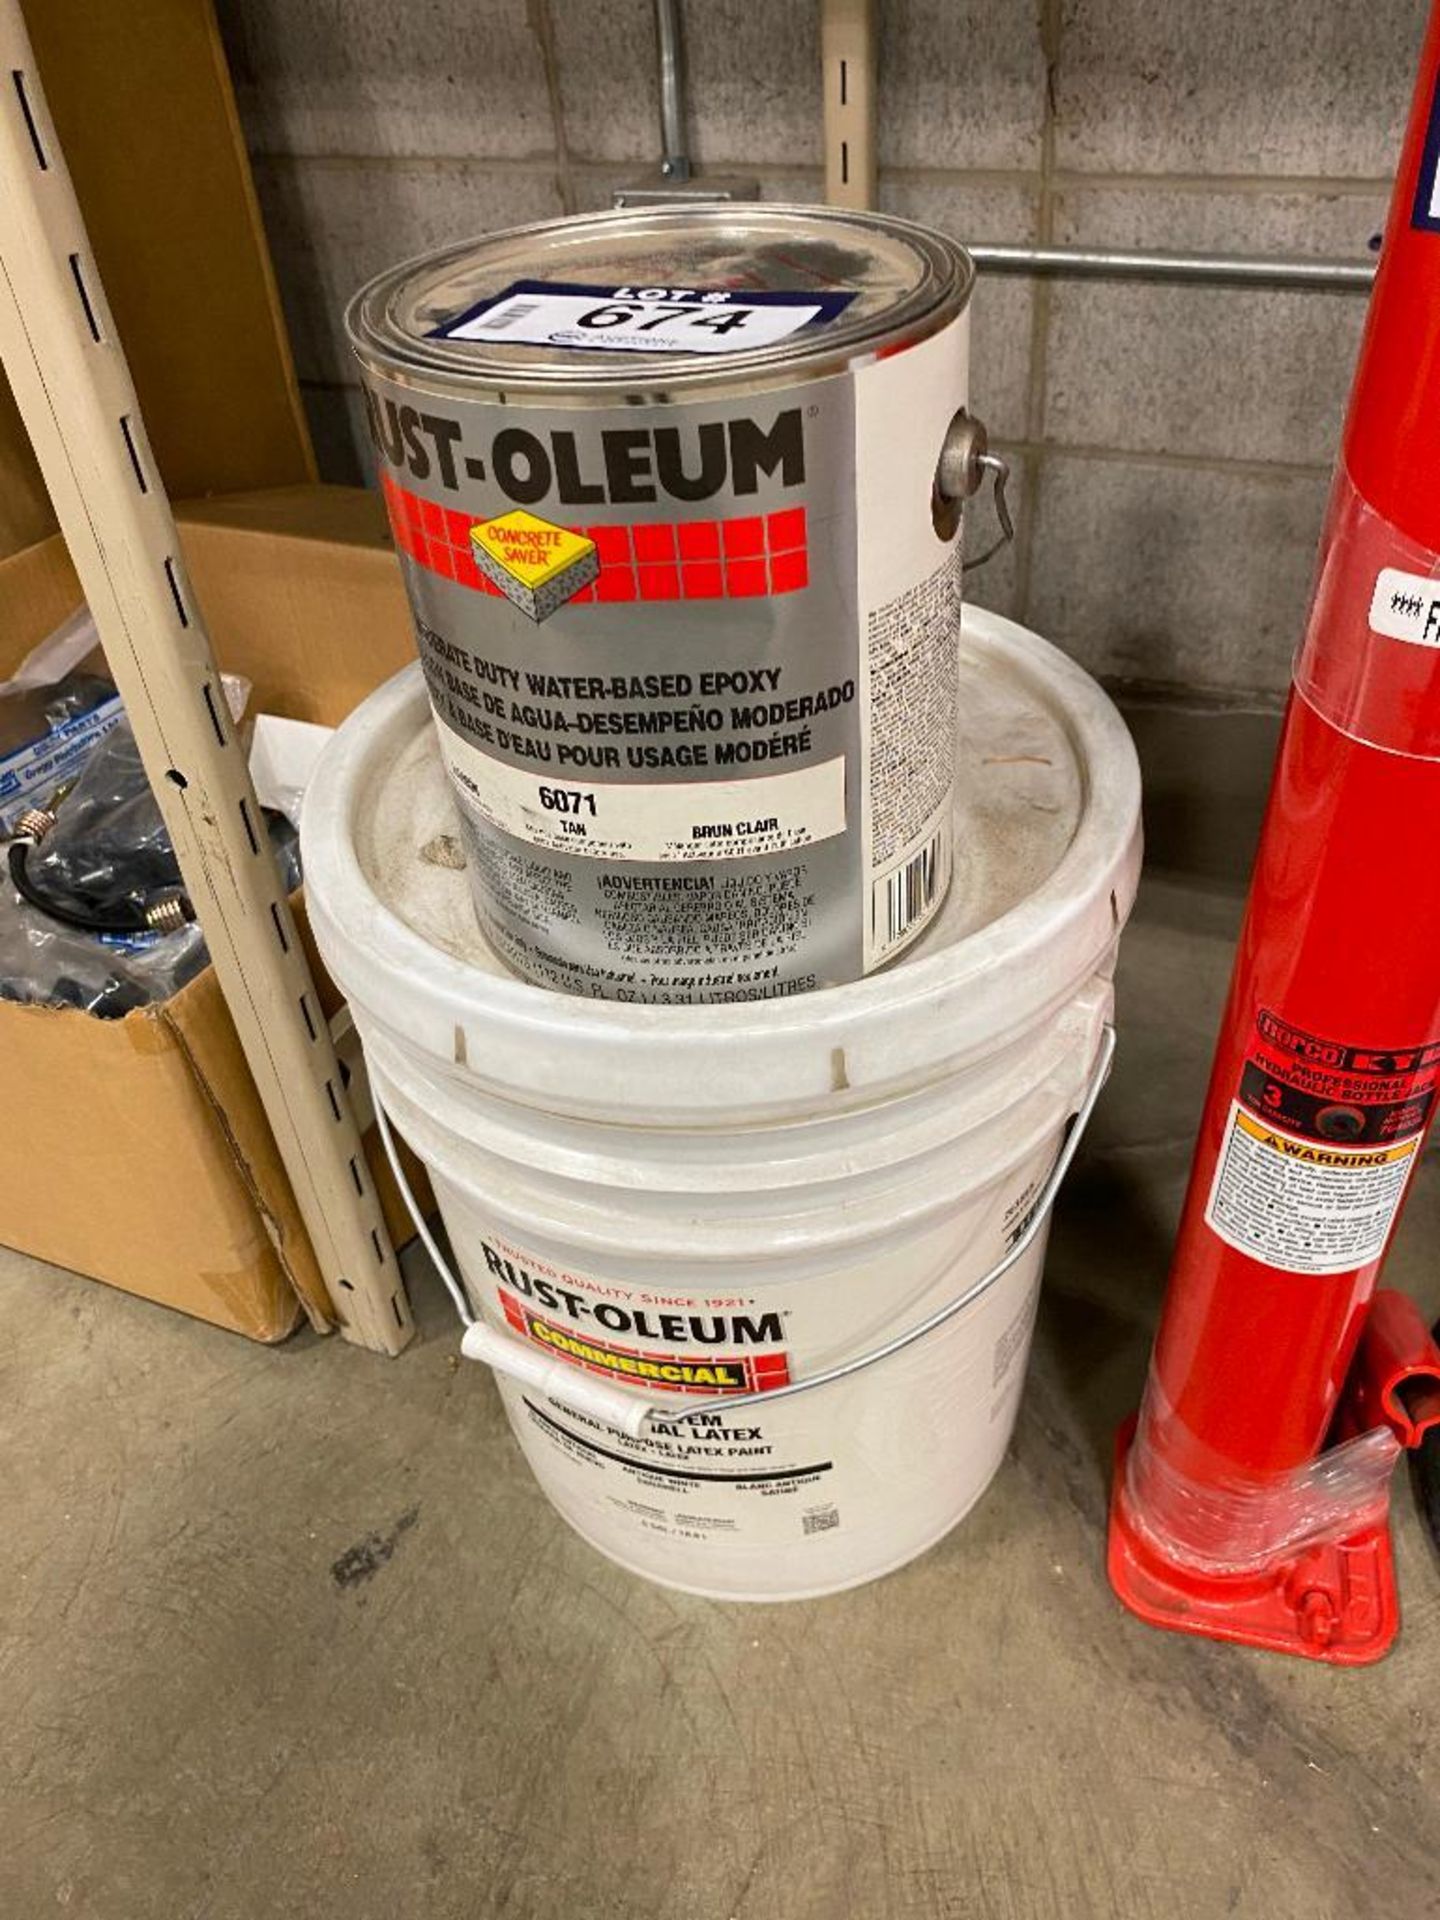 Lot of Rust-oleum Water Based Epoxy and Latex Paint